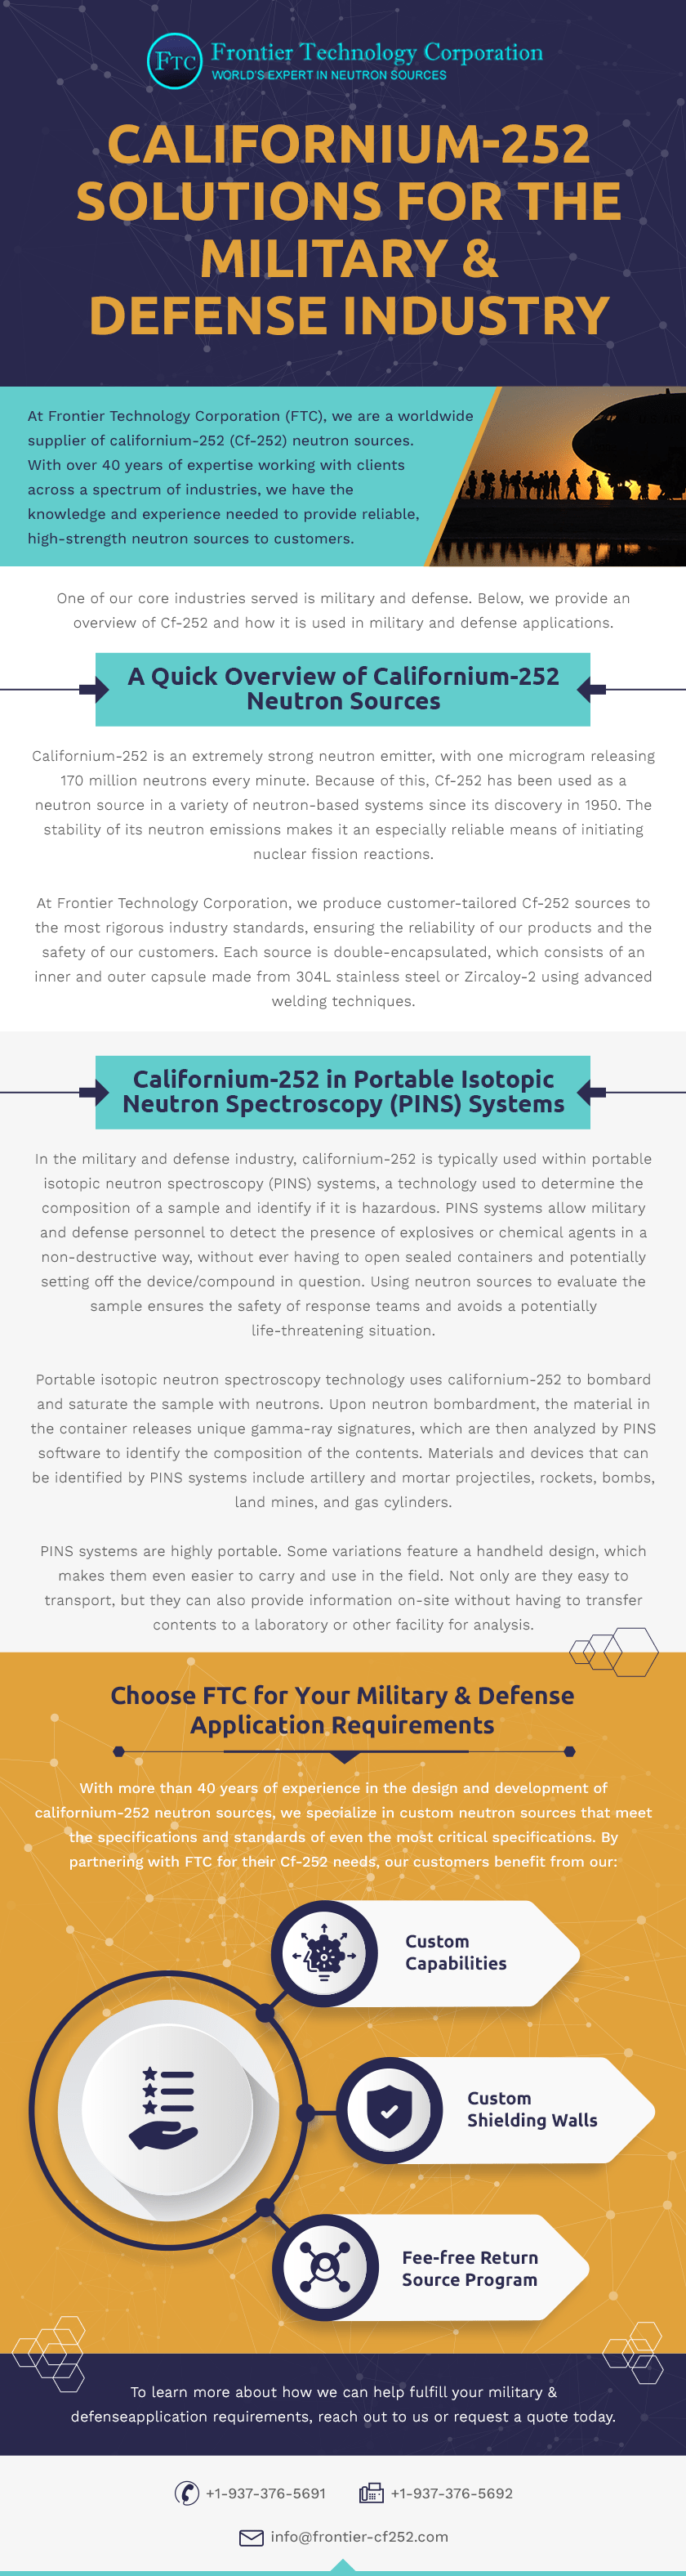 Californium-252-Solutions-for-the-Military-&-Defense-Industry